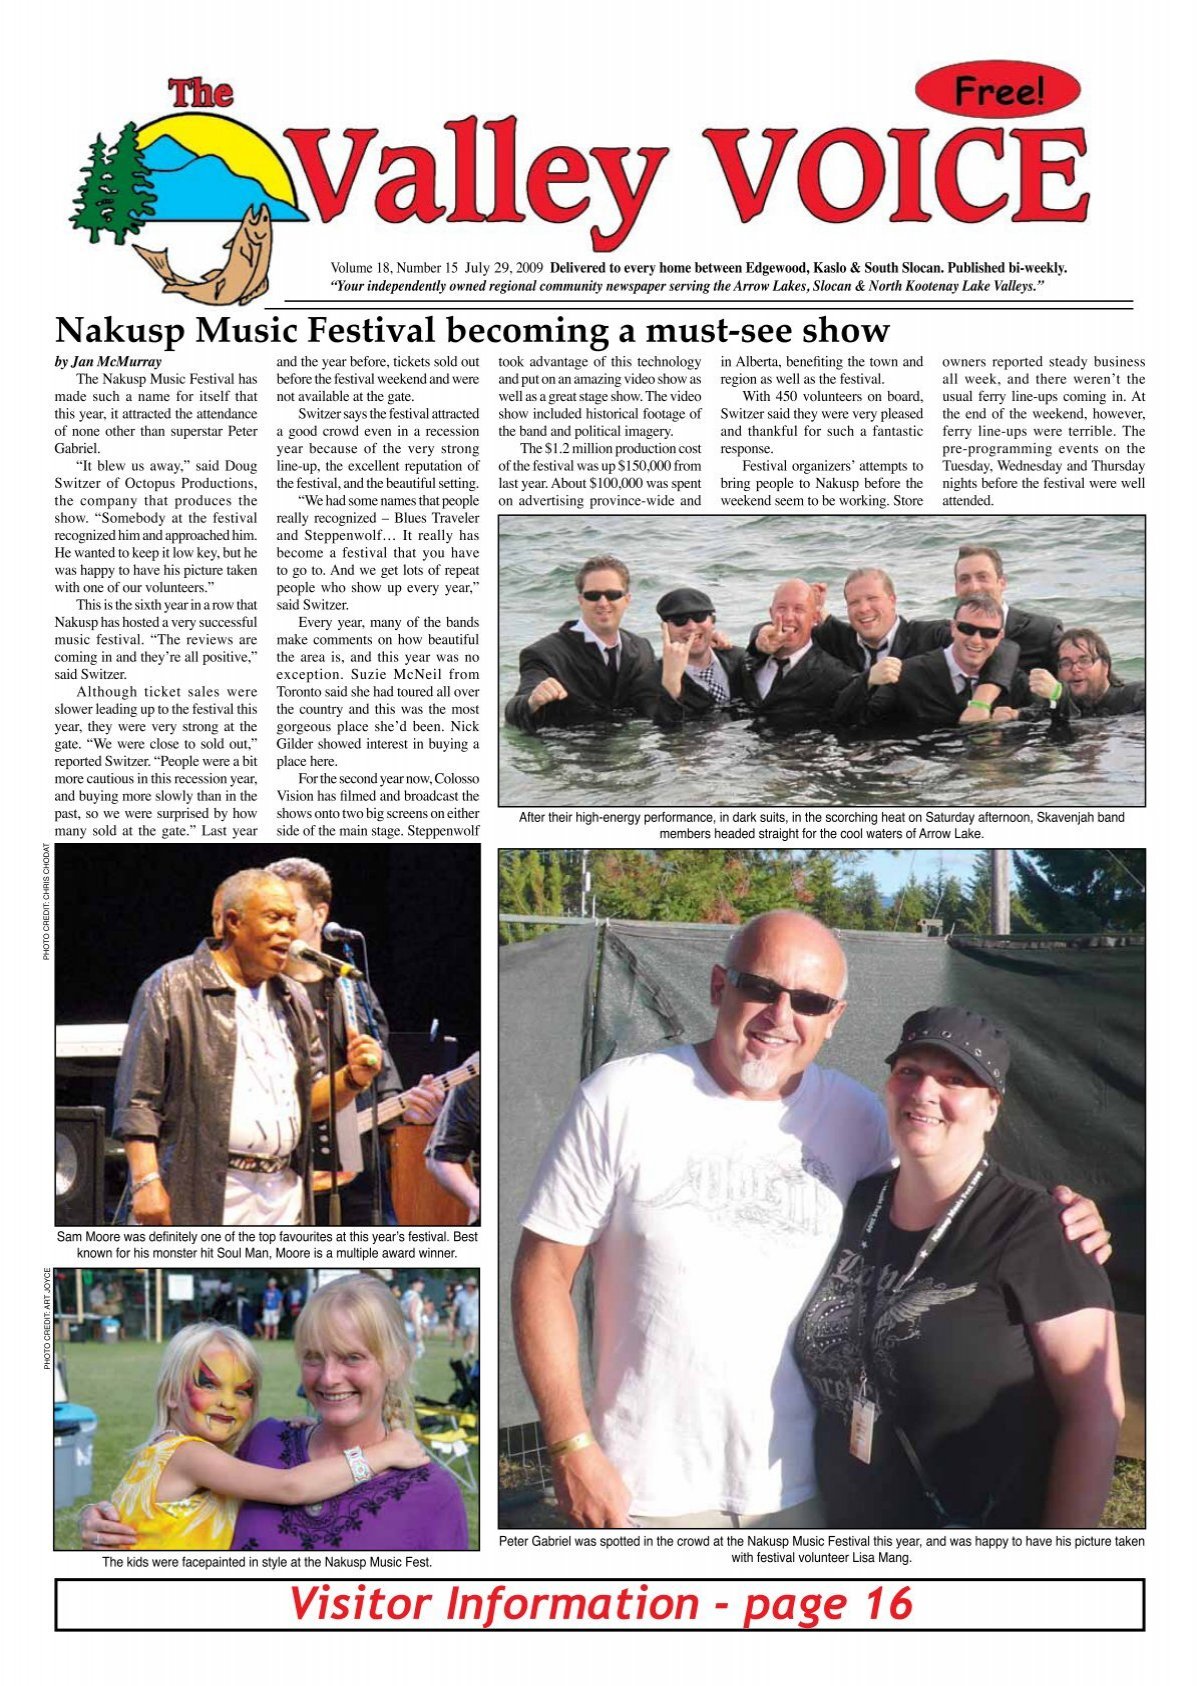 Visitor Information - page 16 - Valley Voice Newspaper